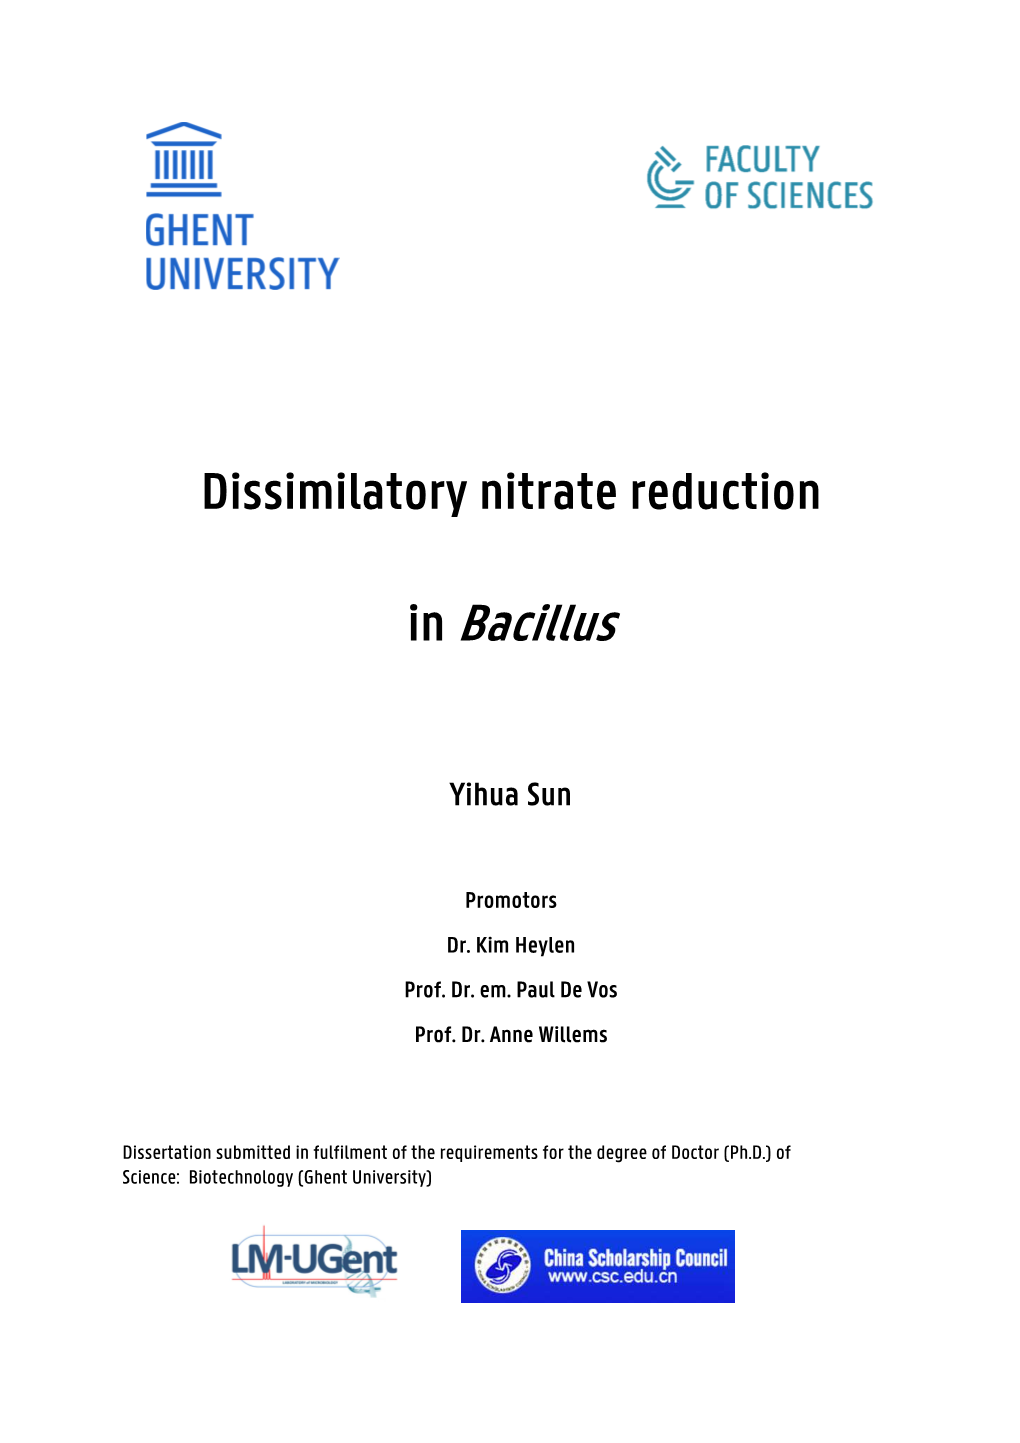 Dissimilatory Nitrate Reduction in Bacillus Copyright ©2017, Yihua Sun ISBN-Number: 978-94-6197-486-0 All Rights Are Reserved